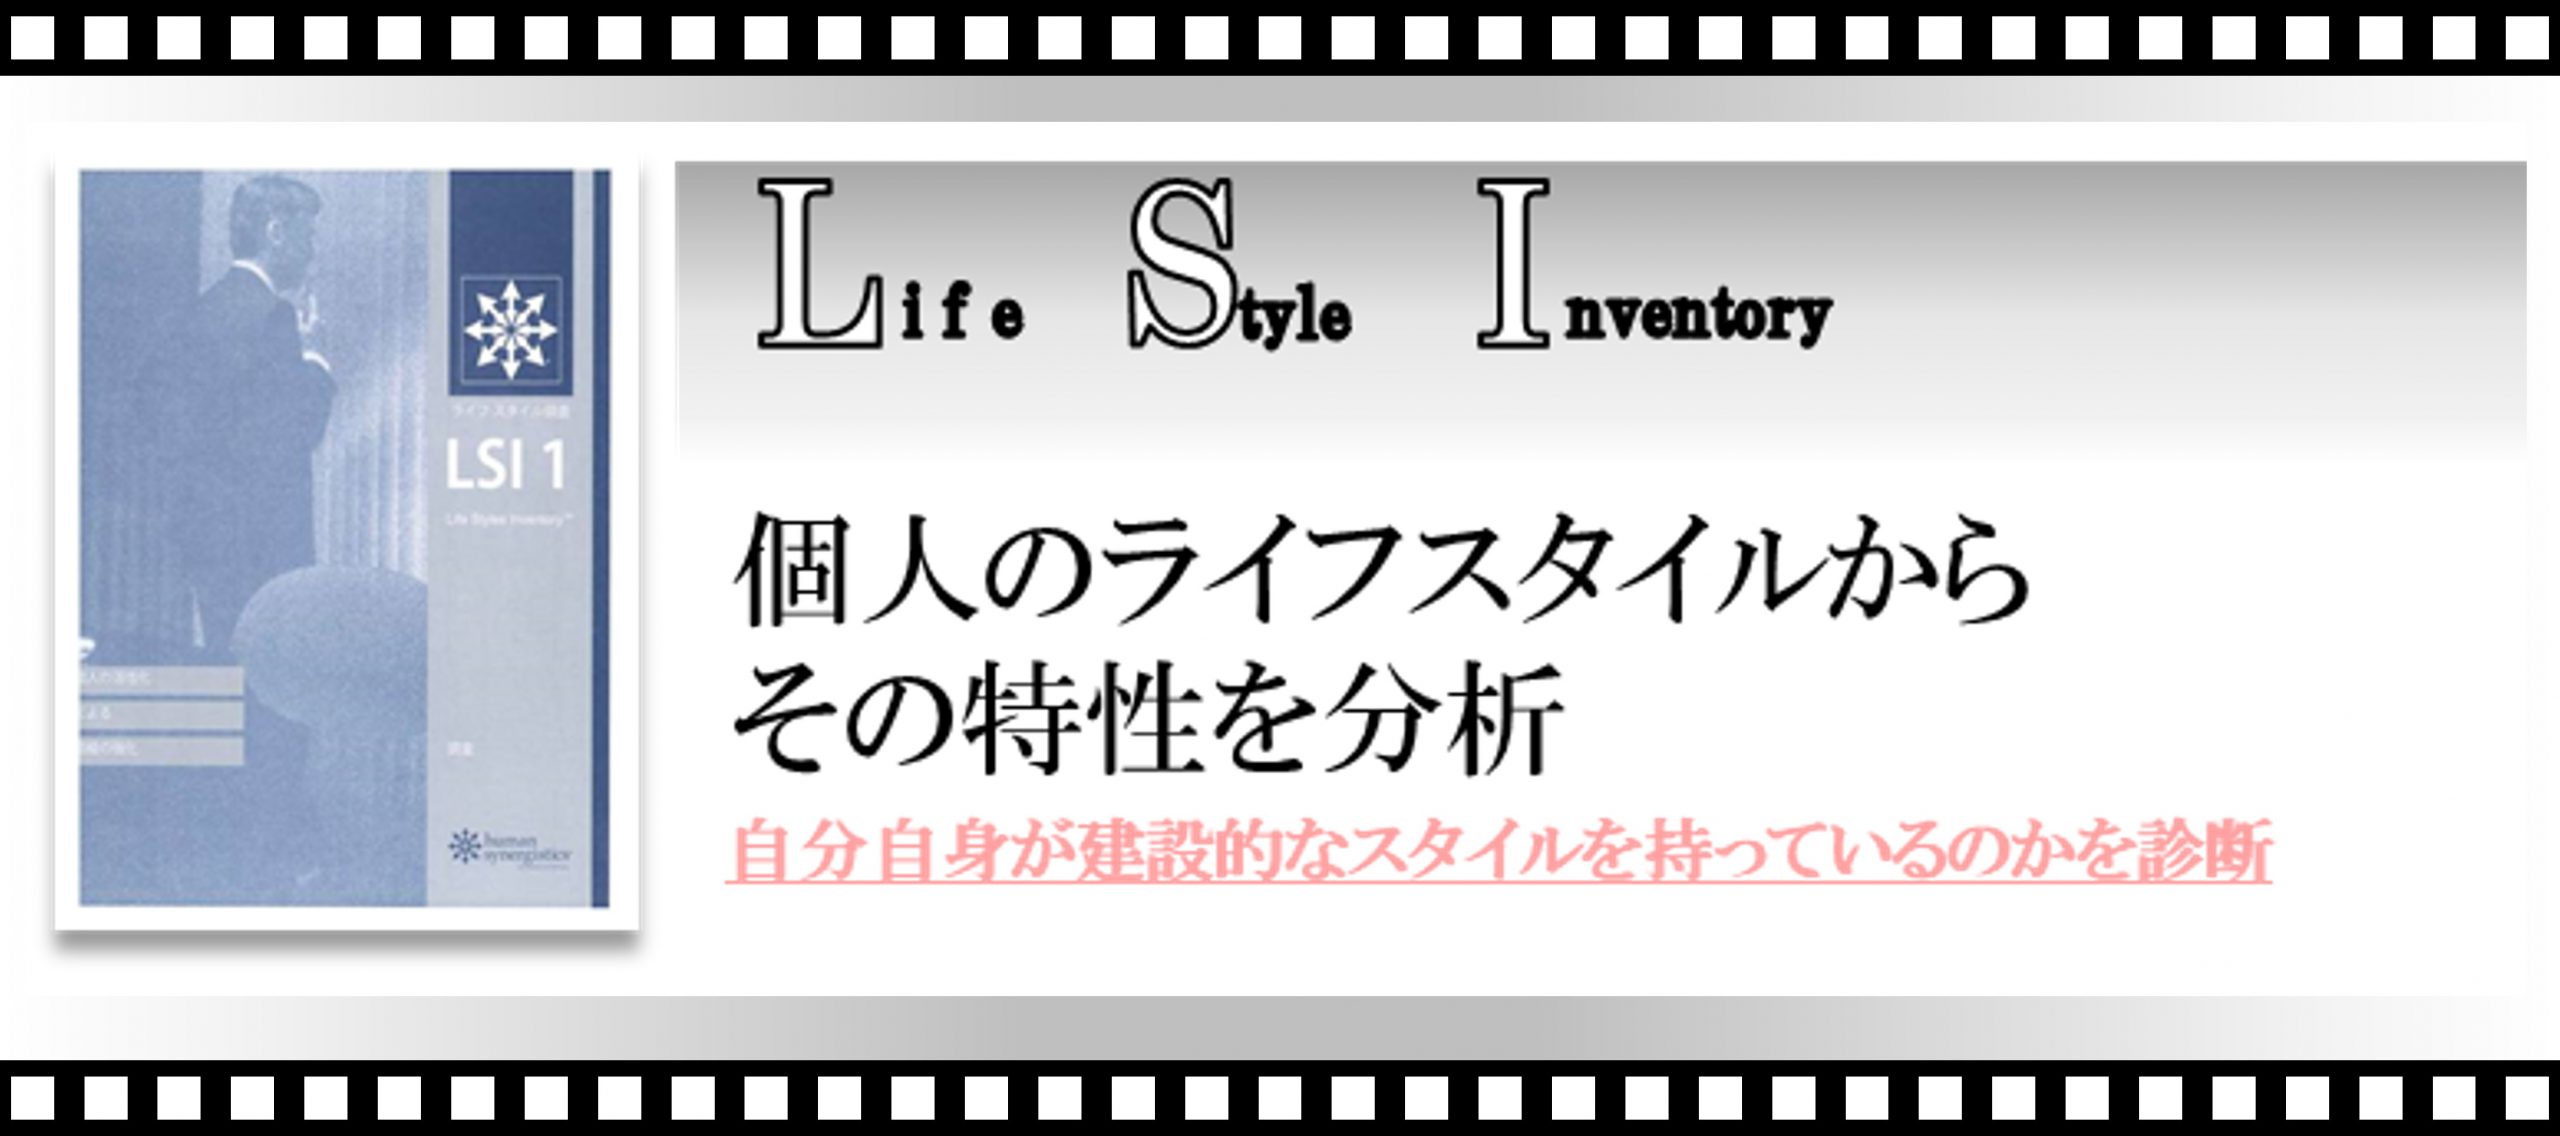 Life Styles Inventory